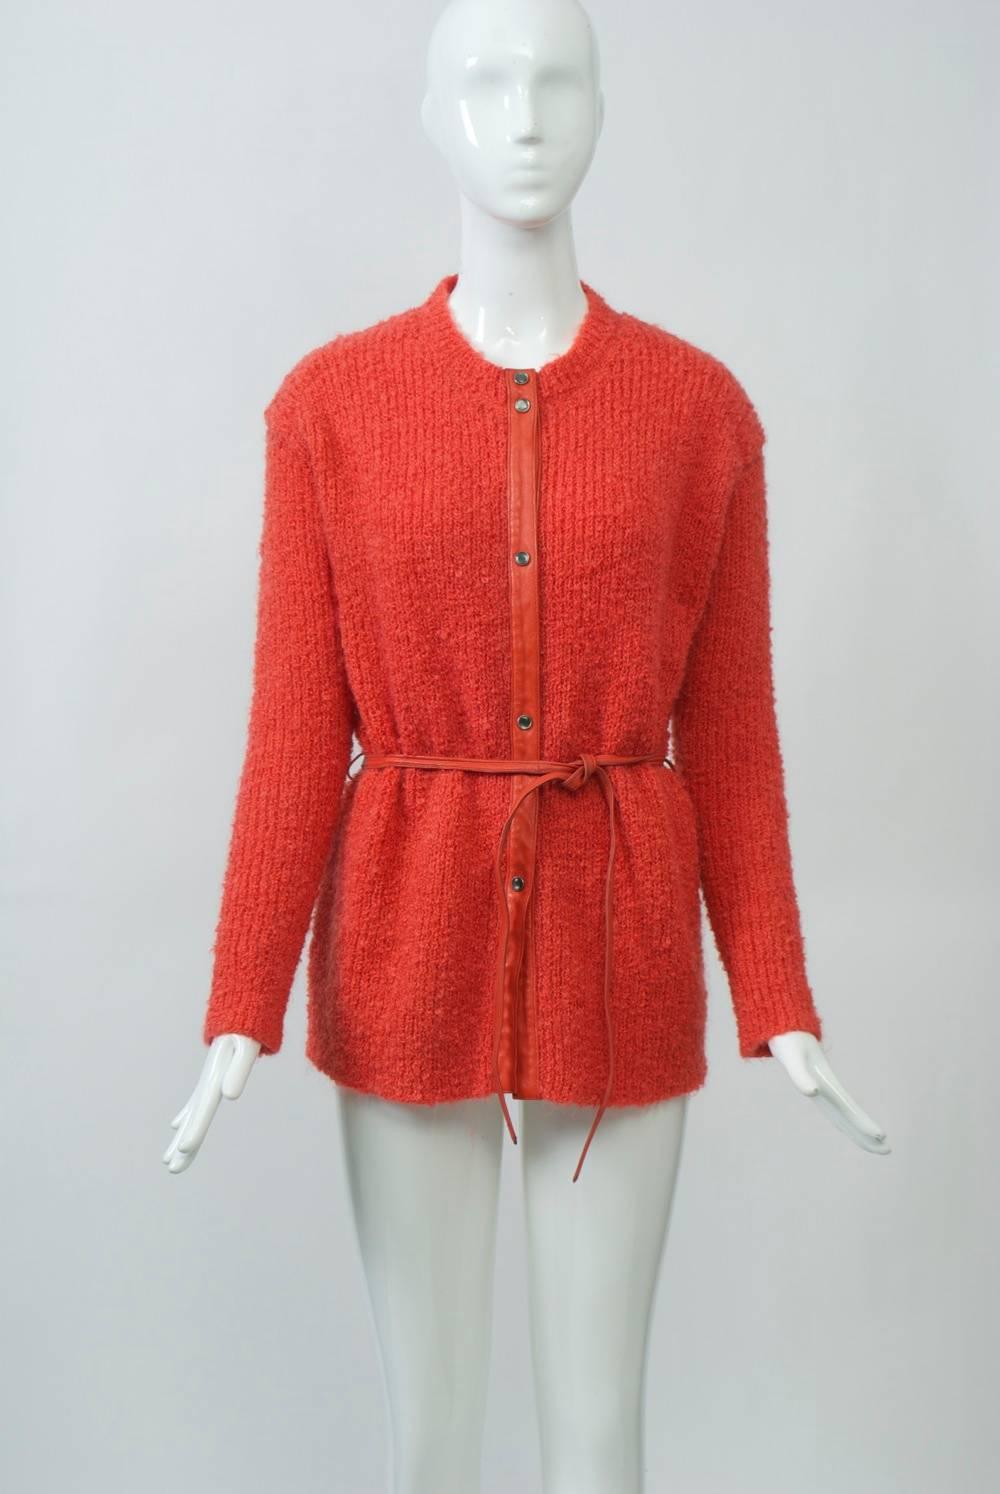 Cardigan in orange wool bouclé designed by Bonnie Cashin and featuring her characteristic leather trim down the front and in the narrow leather tie belt and gray pearl snap buttons. Orange leather also appears inside at the shoulders and central